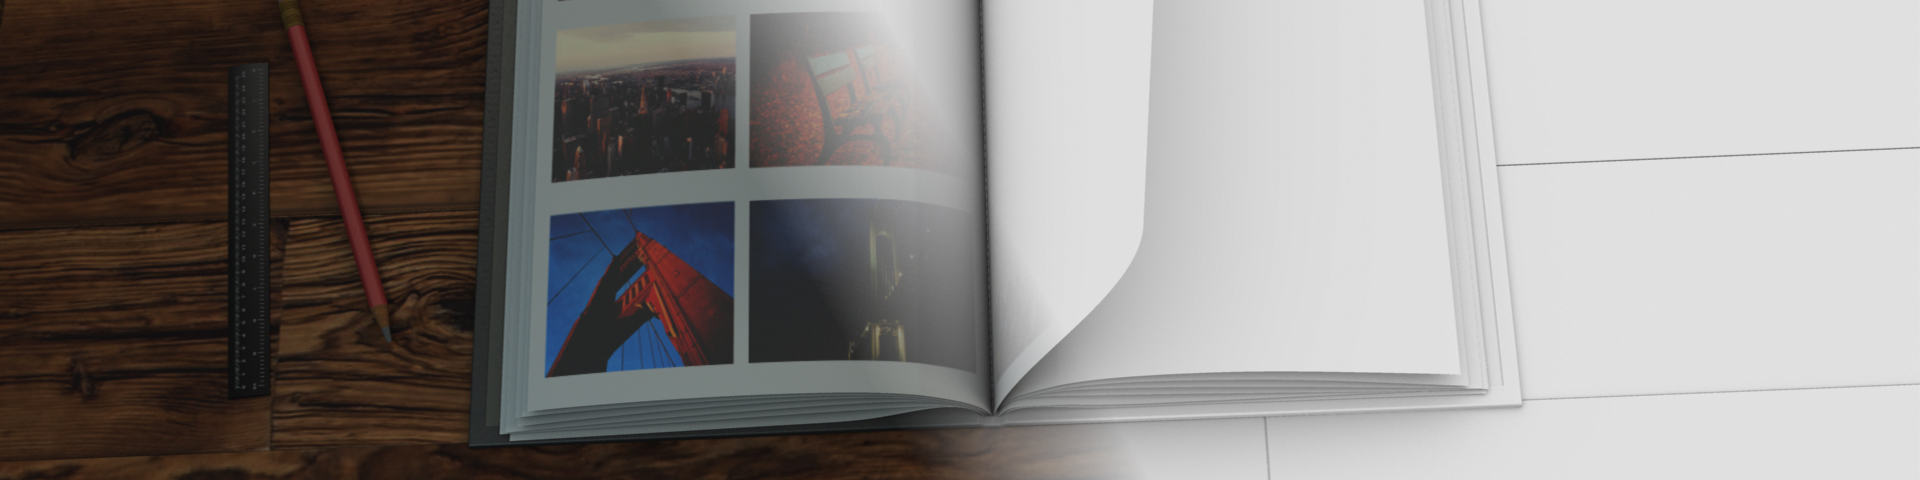 Side Projects: Compositing a CG Photo Book